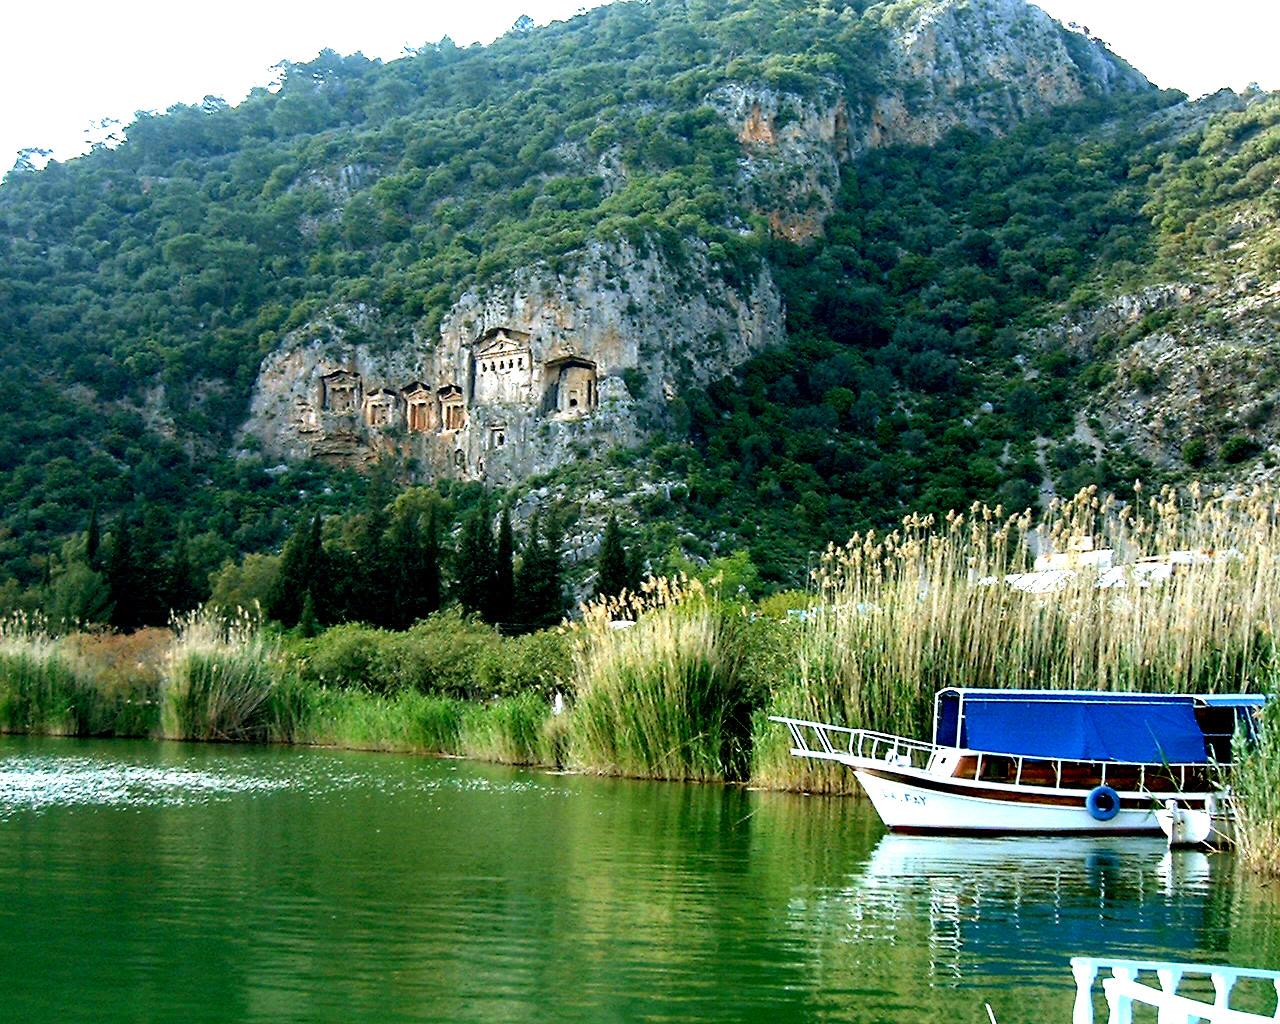 Rock tombs built by Lycians -- people who lived in the region 2,500 years ago -- loom over the the Dalyan waterways.